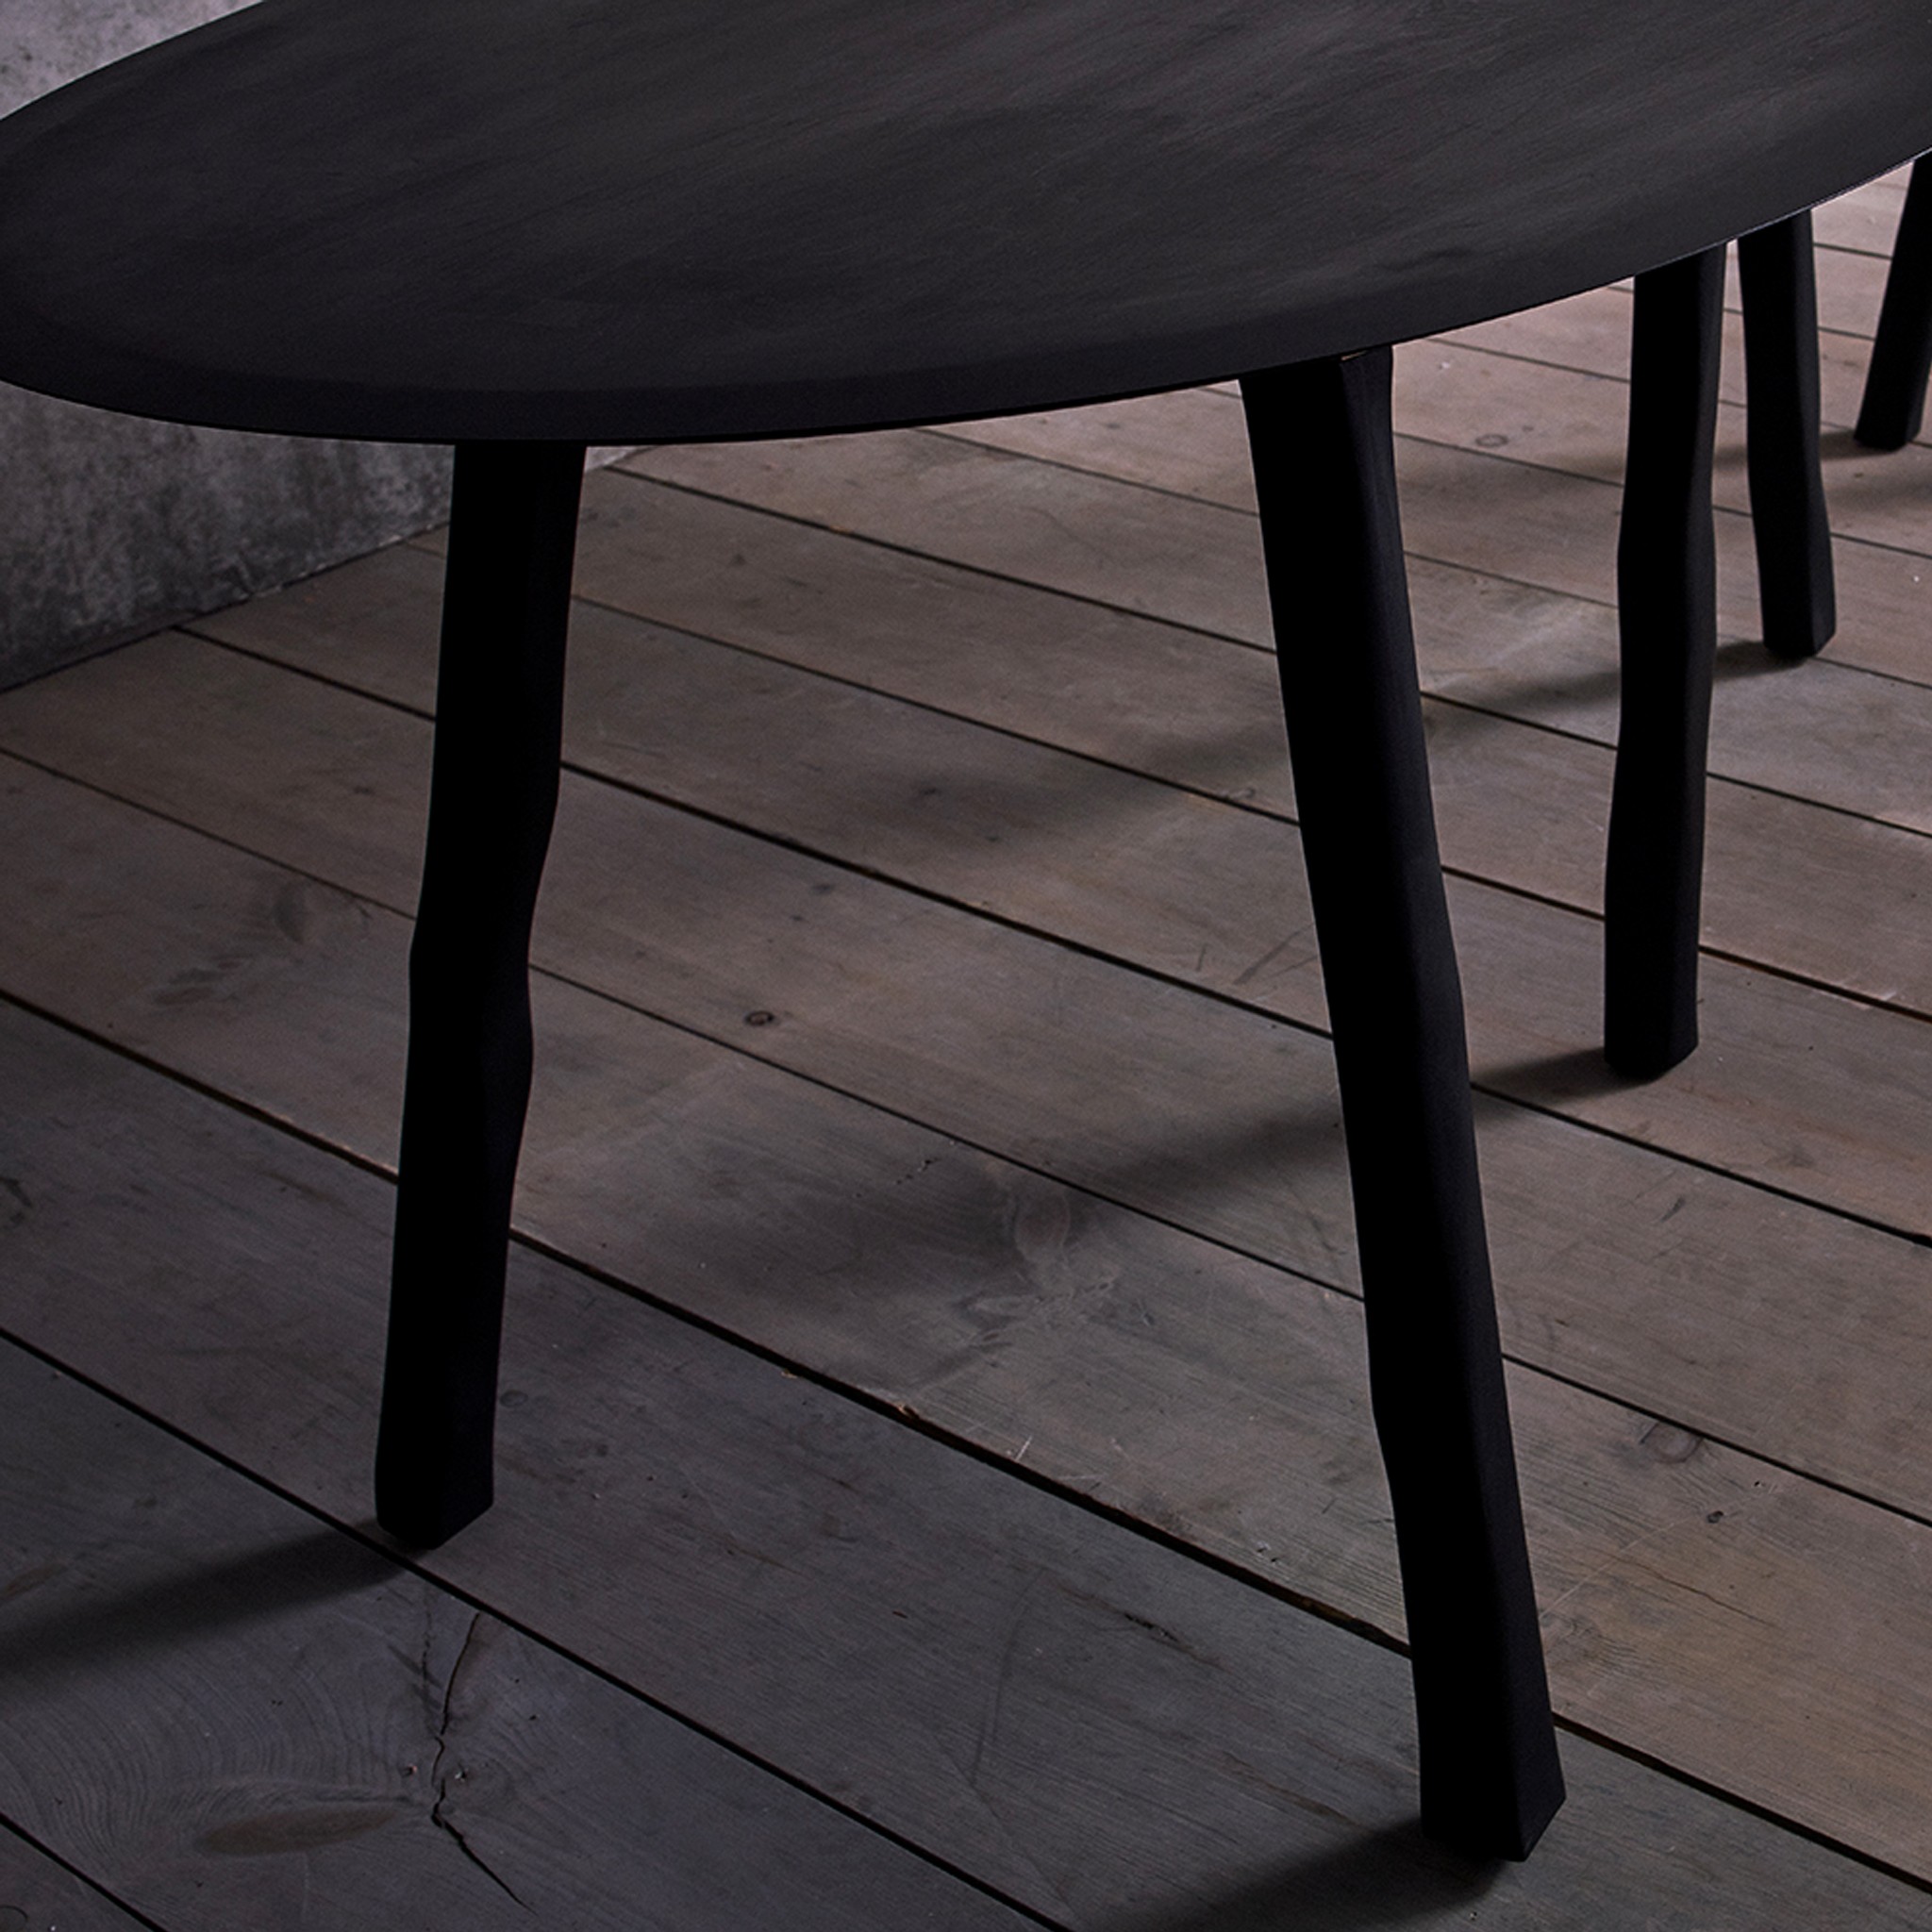 a black table sitting on top of a wooden floor